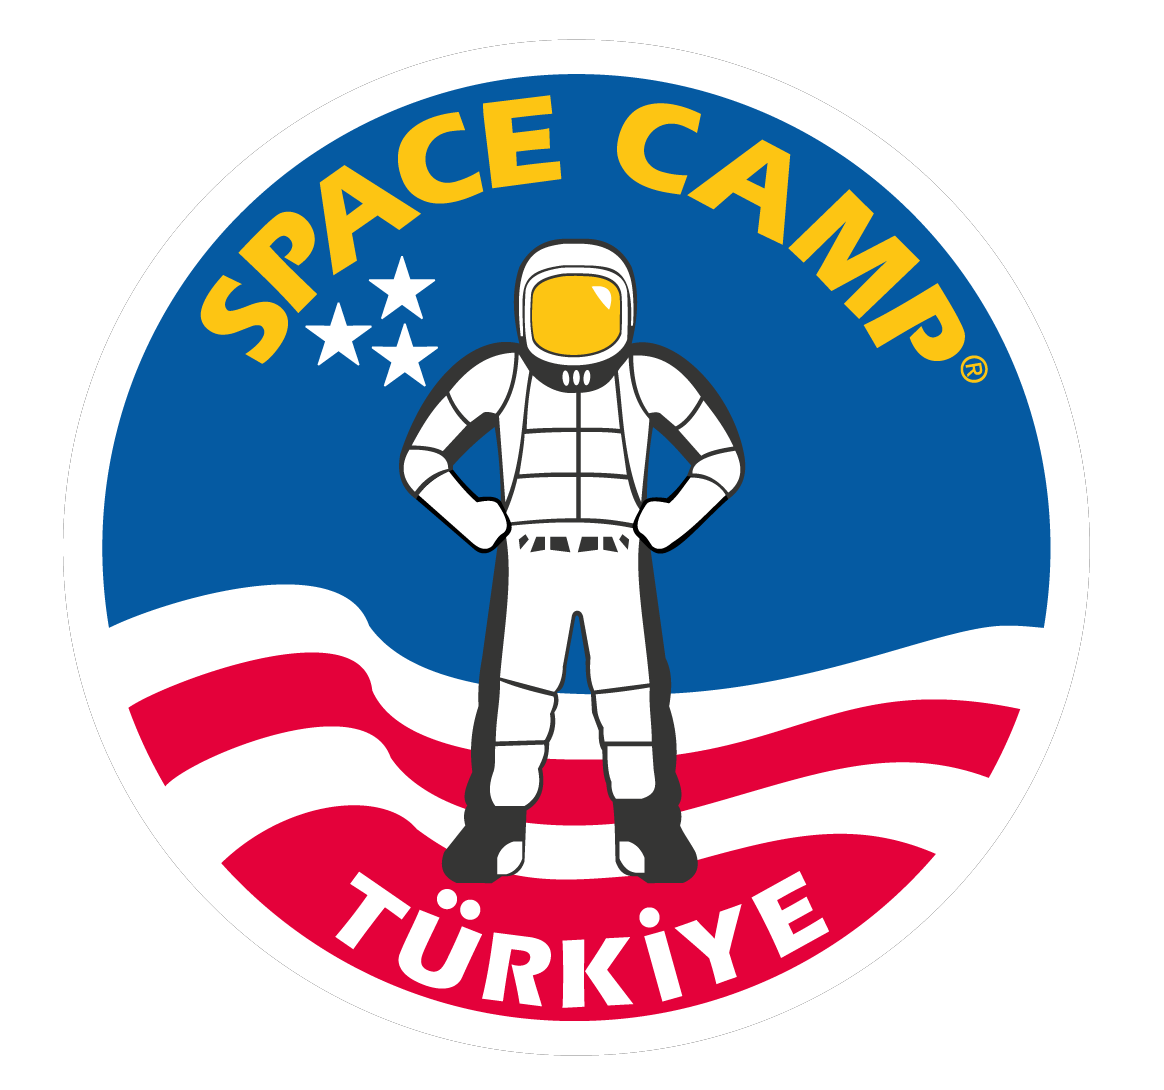 Space Camp Türkiye - Summer and Winter Camps for Children and Teens